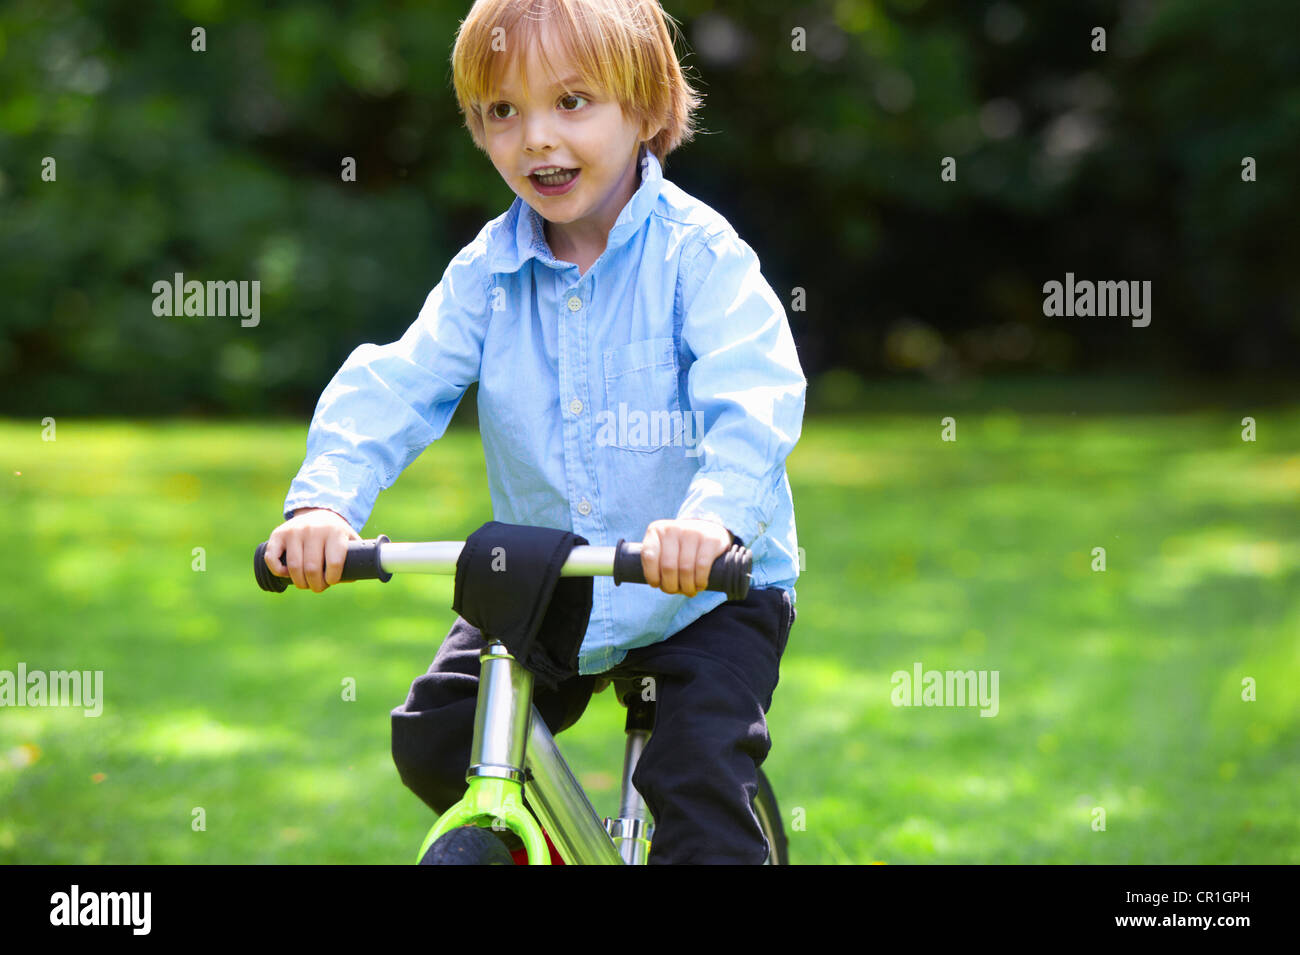 Boy riding bicycle in backyard Banque D'Images